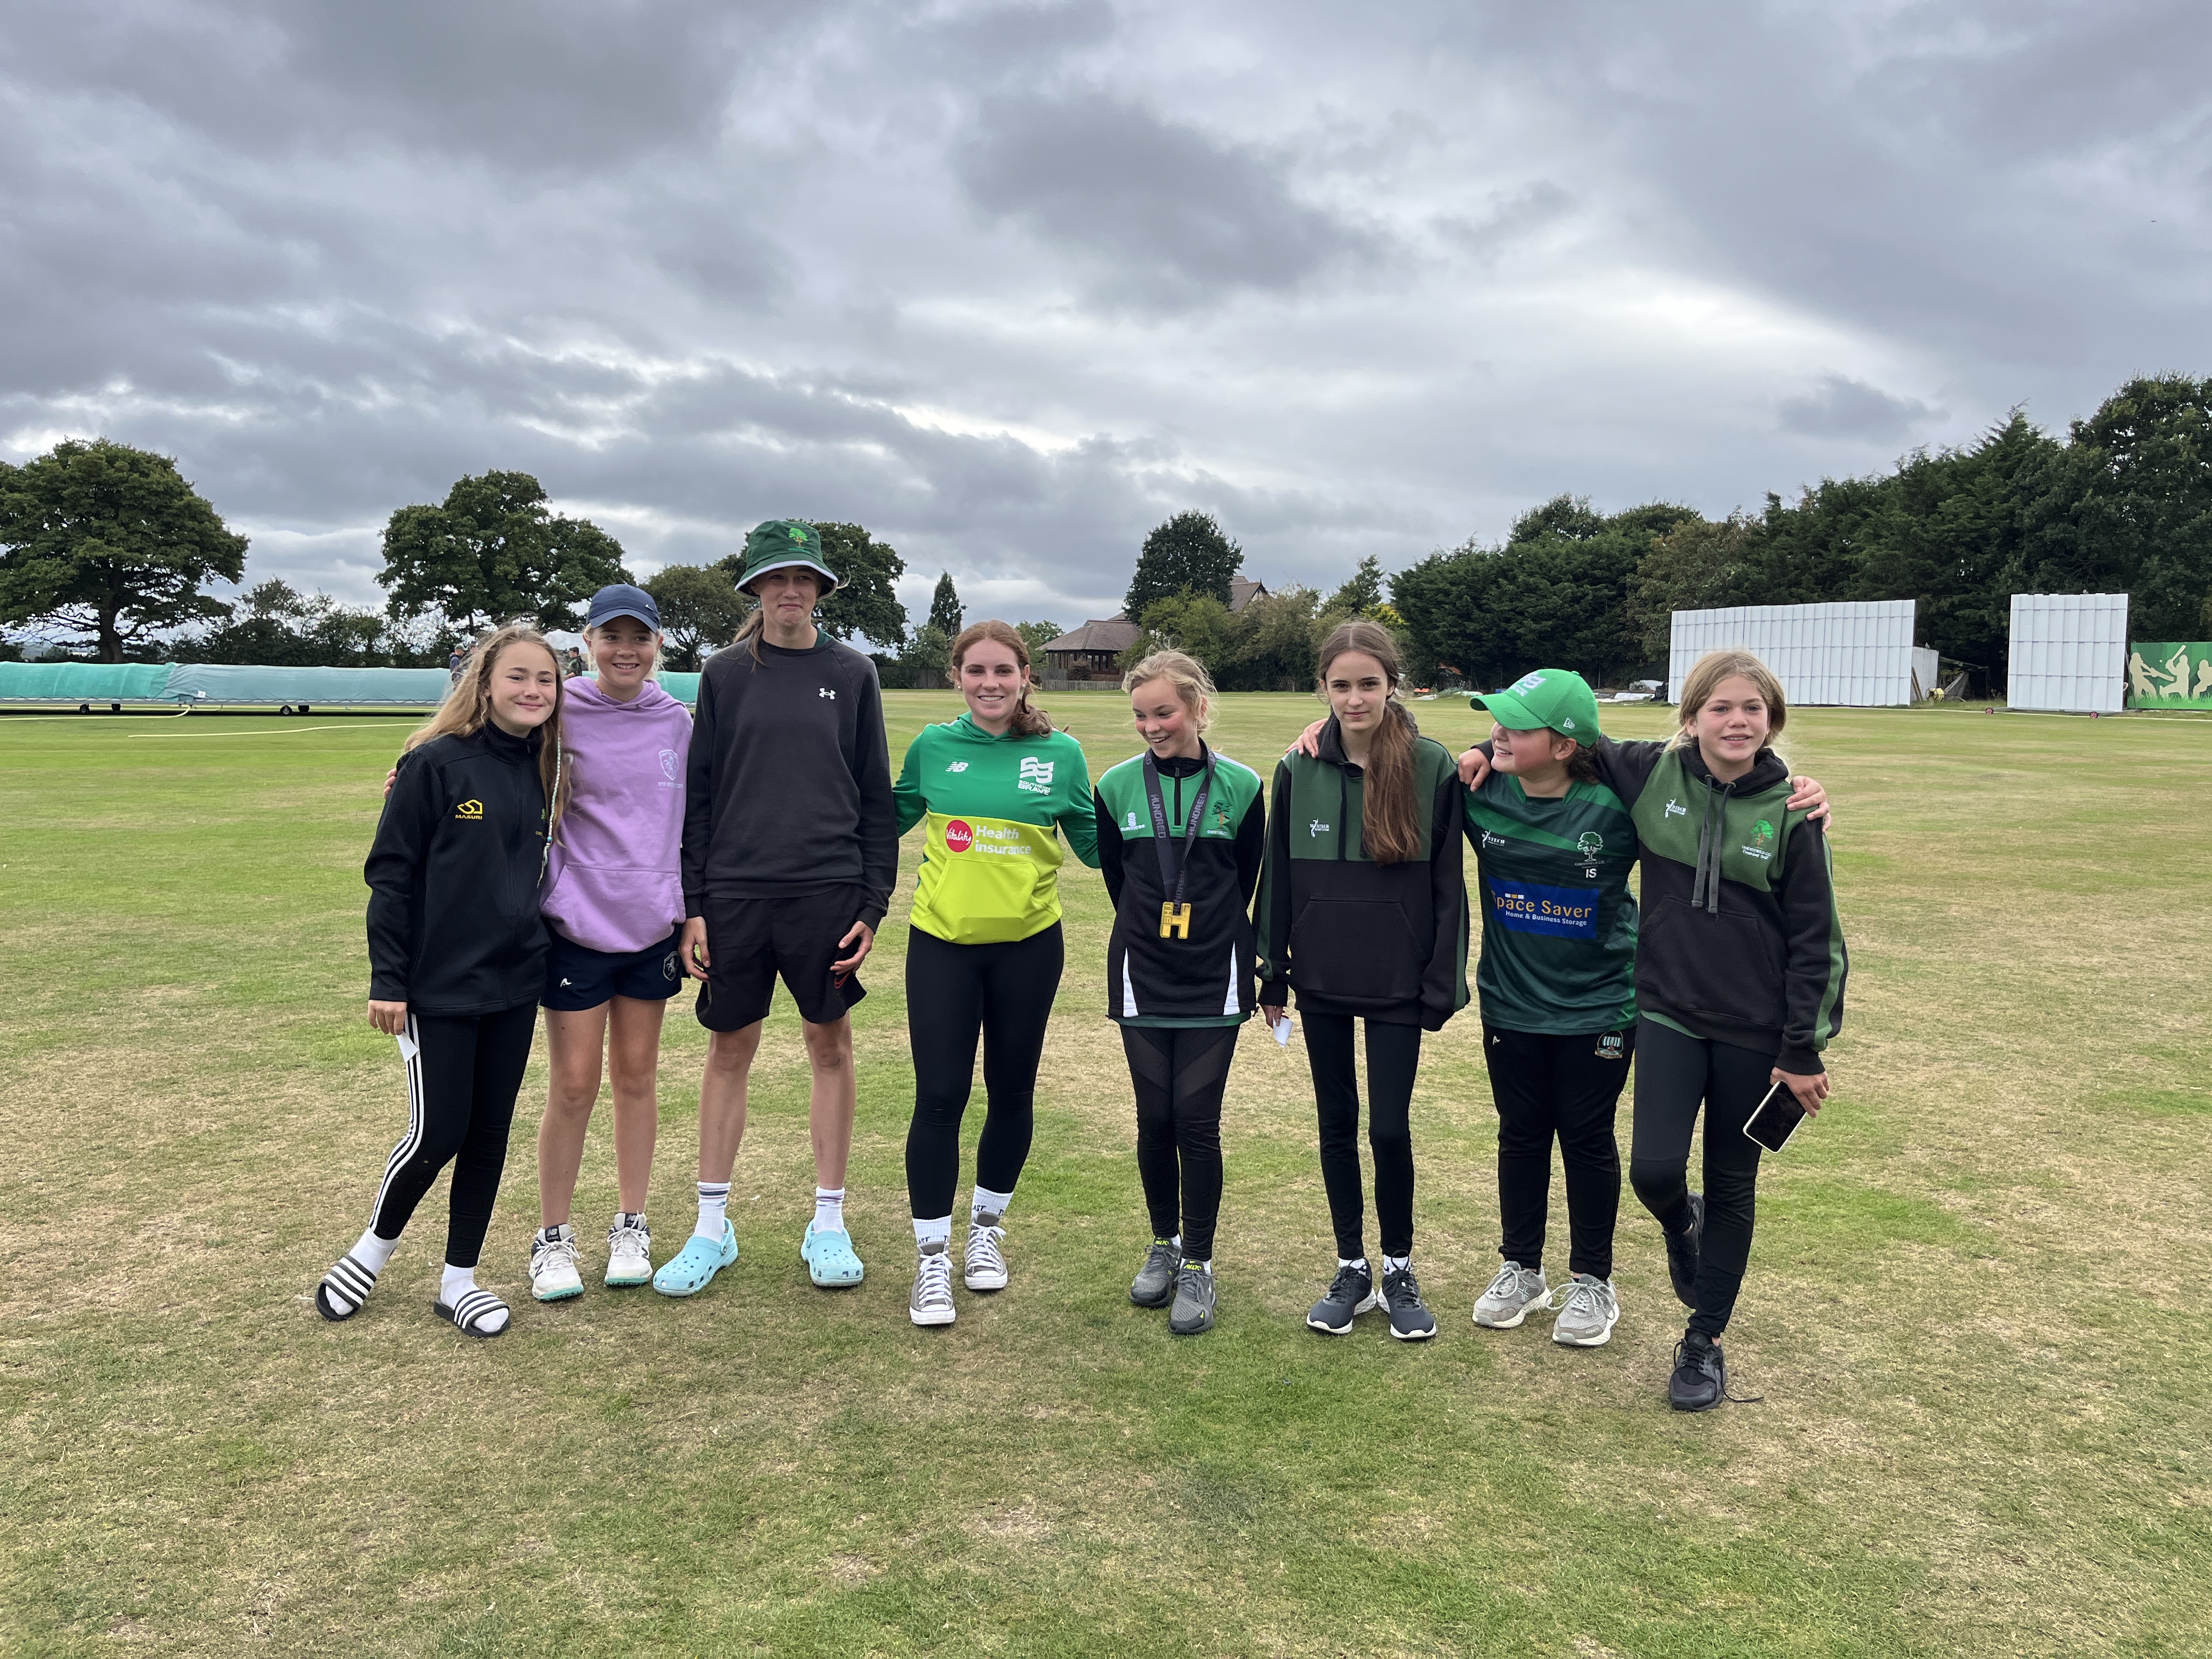 The Hundred winner, Kalea Moore, Southern Brave visits the girls at Chestfield Cricket Club